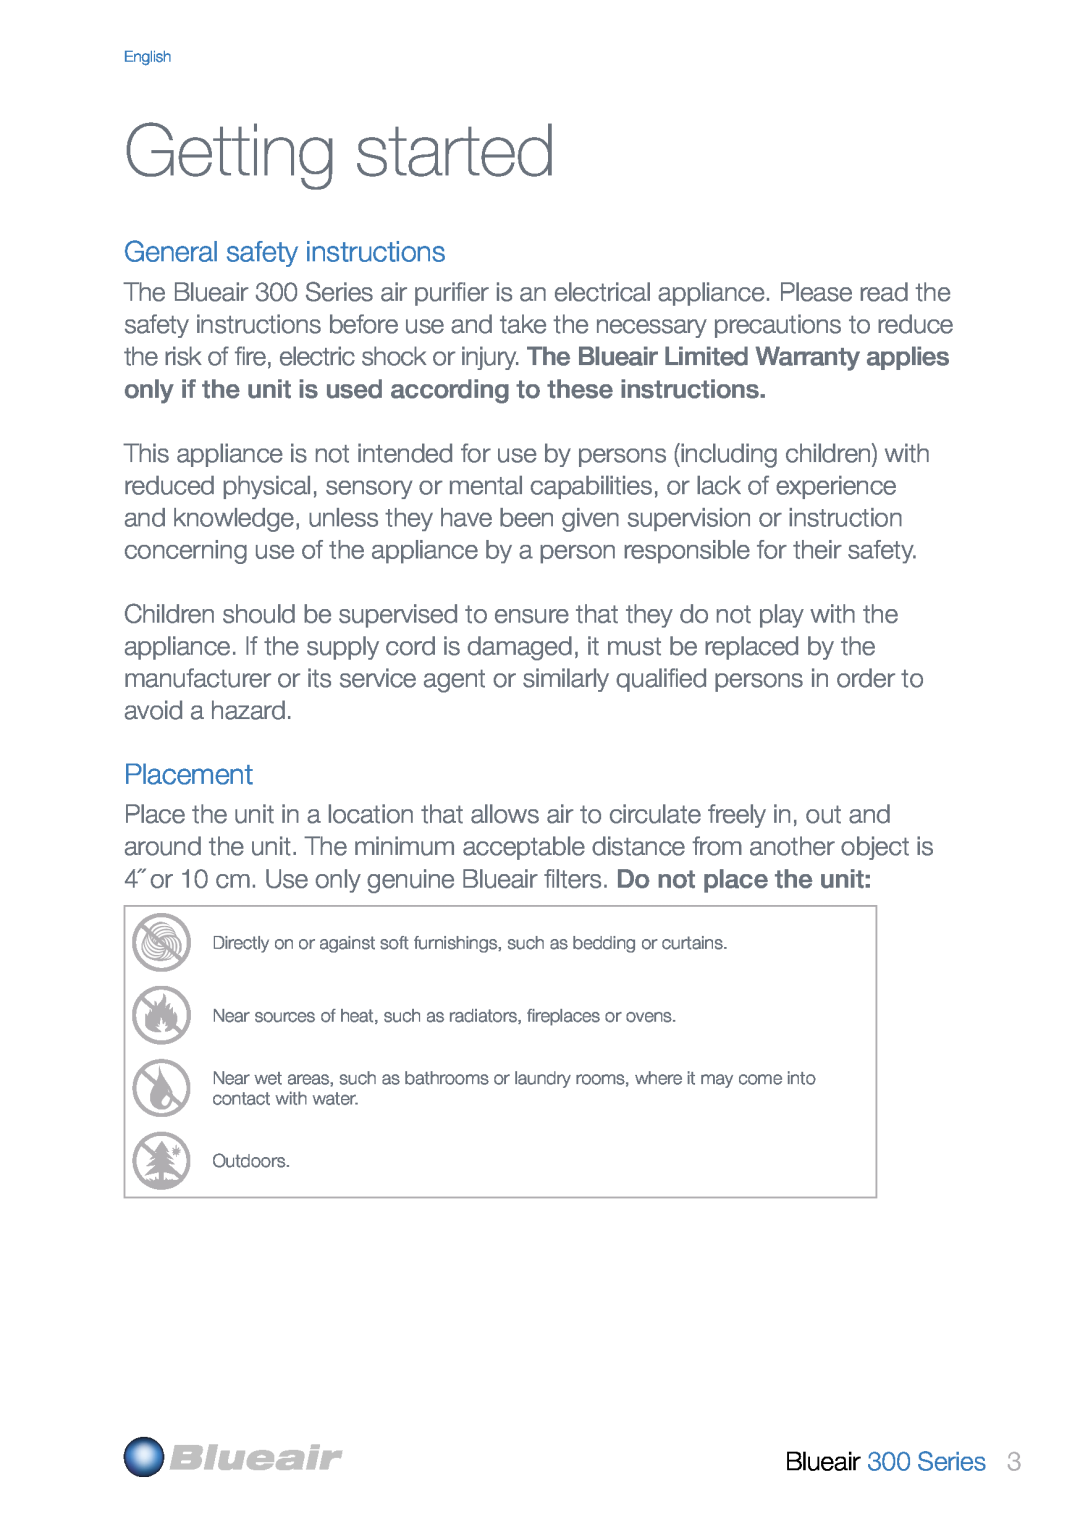 Blueair user manual Getting started, General safety instructions, Placement, Blueair 300 Series 